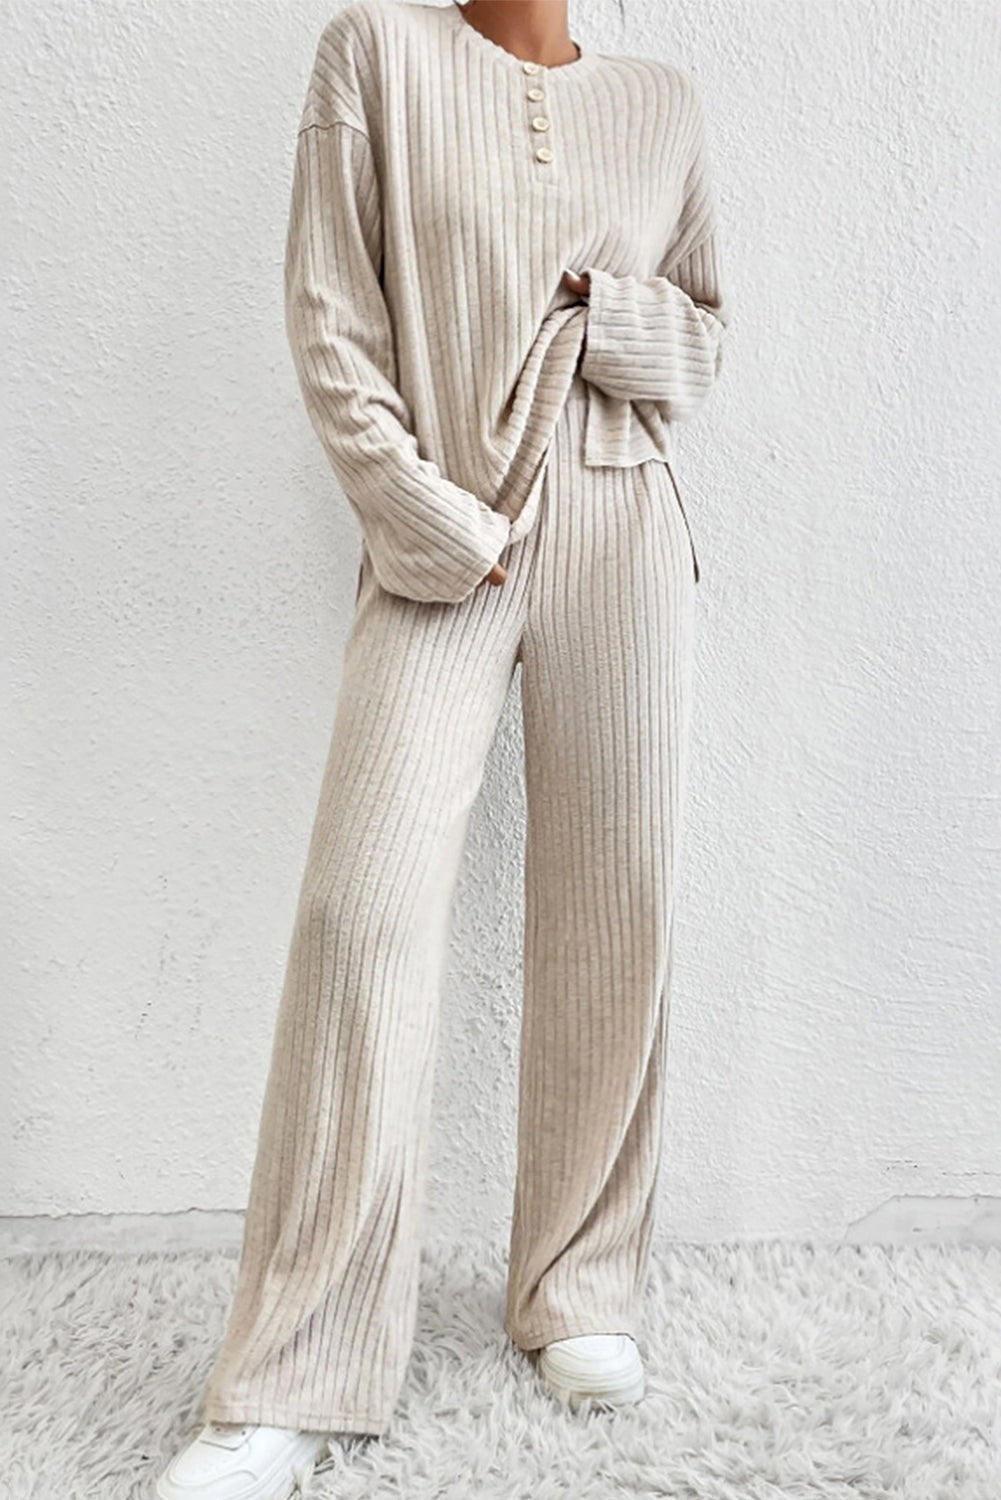 Beige pants set 85%Polyester+10%Viscose+5%Elastane - Ribbed Knit V Neck Slouchy Two-piece Outfit - pants or short set various colors - women's pants set at TFC&H Co.